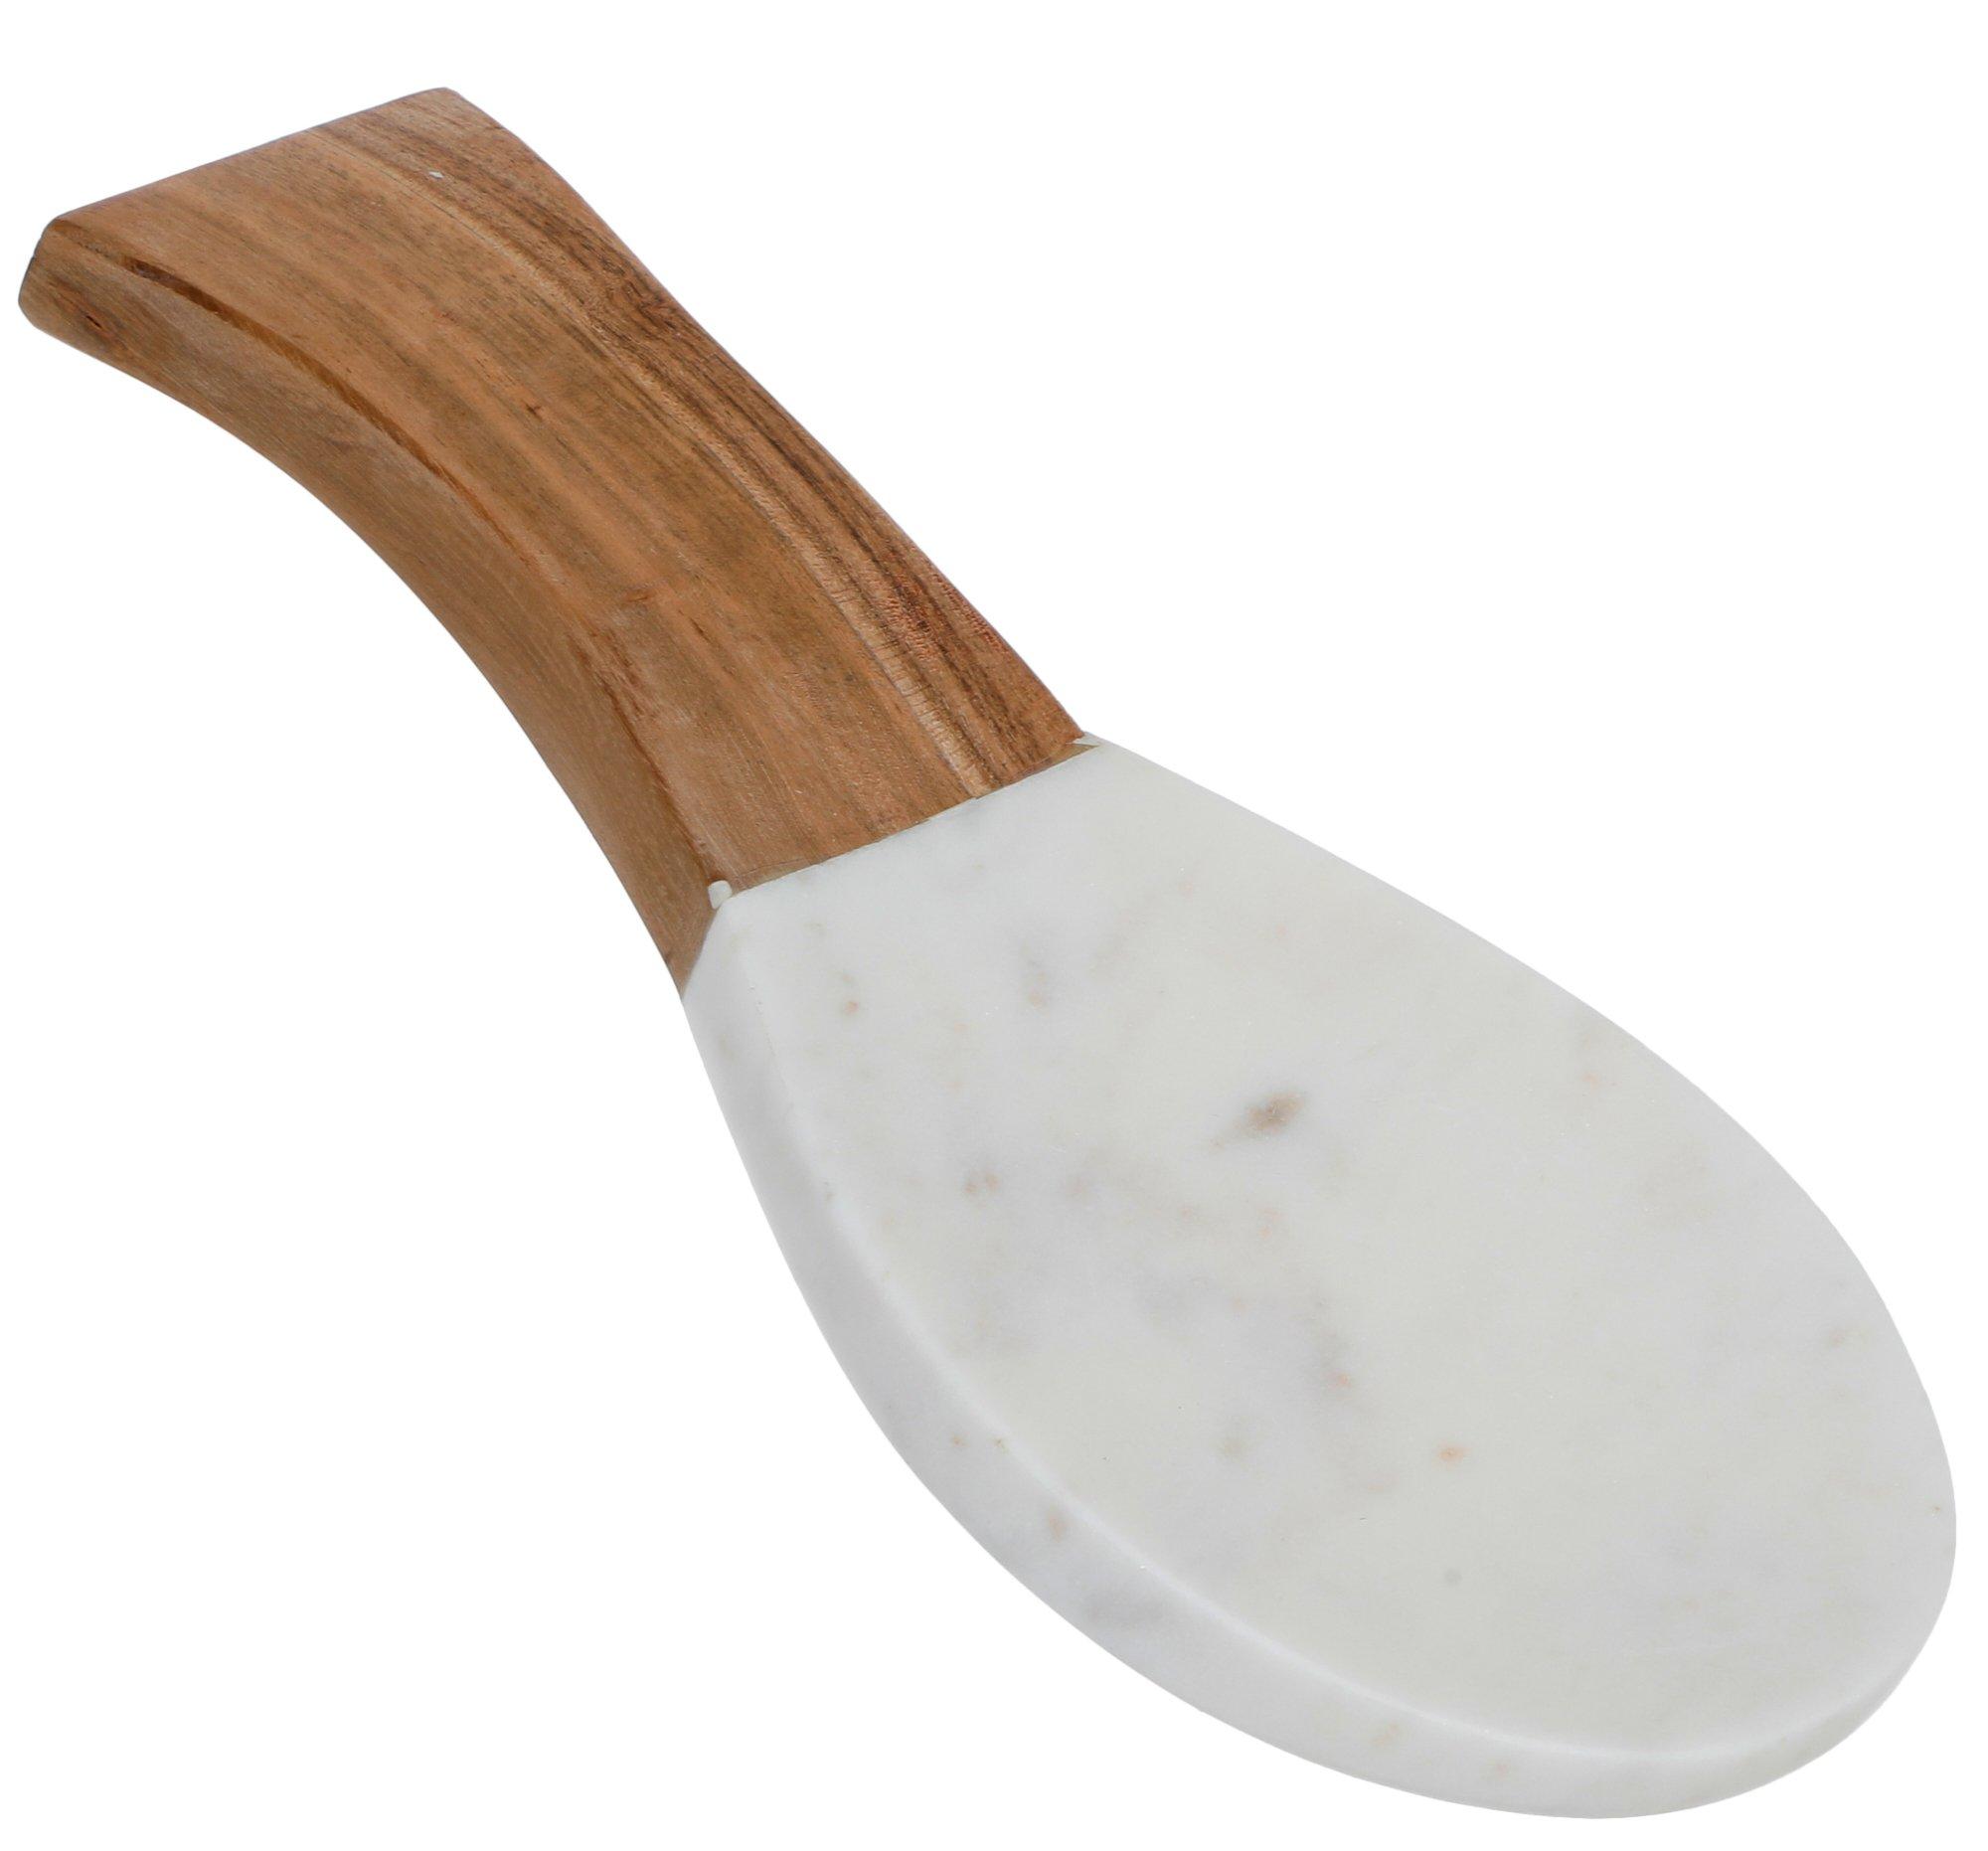 11x5 Marble Wood Spoon Rest